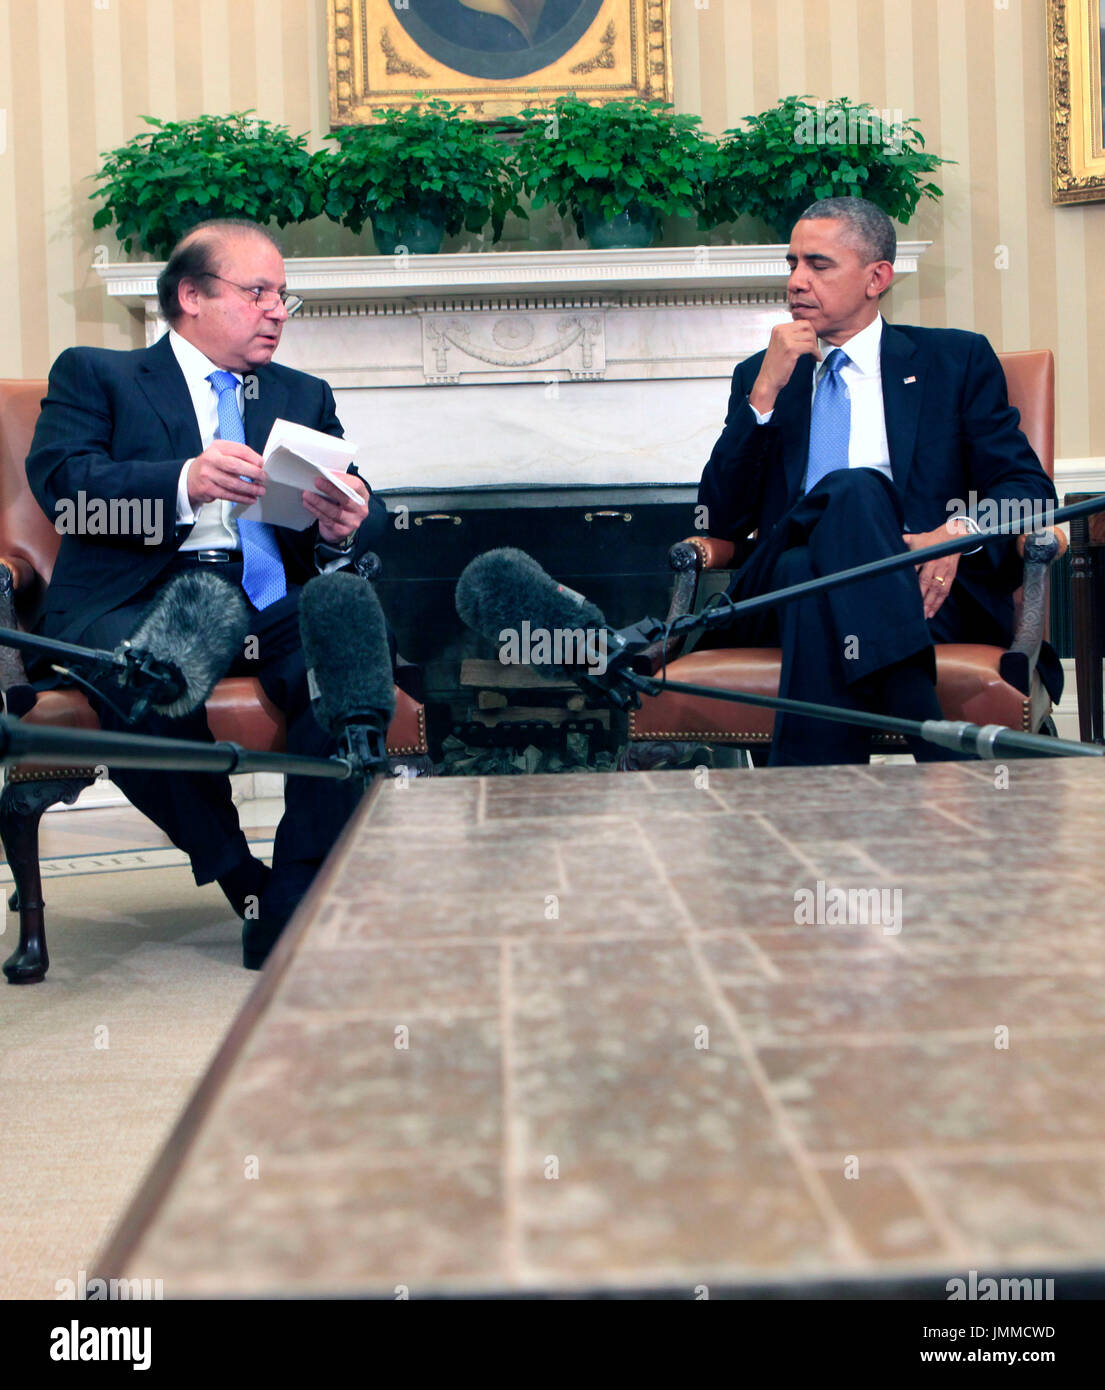 United States President Barack Obama meets with Prime Minister Nawaz Sharif  of Pakistan in the Oval Office of the White House in Washington, . on  October 23, 2013. Credit: Dennis Brack /